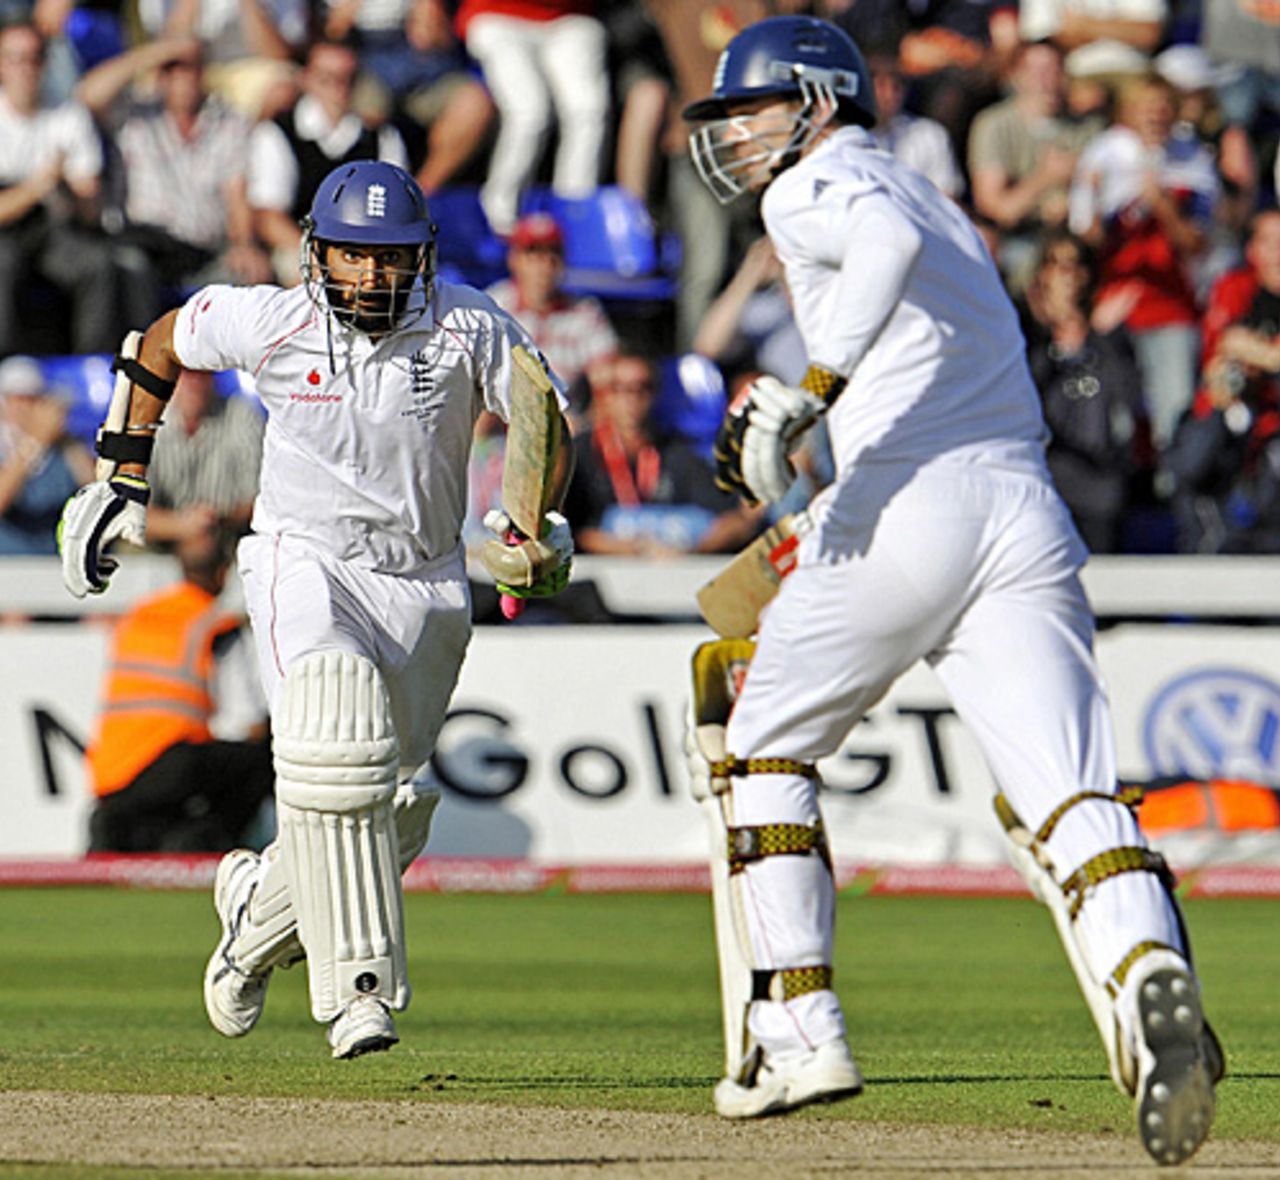 Monty Panesar and James Anderson steal a run during the most tense of evenings, England v Australia, 1st Test, Cardiff, 5th day, July 12, 2009